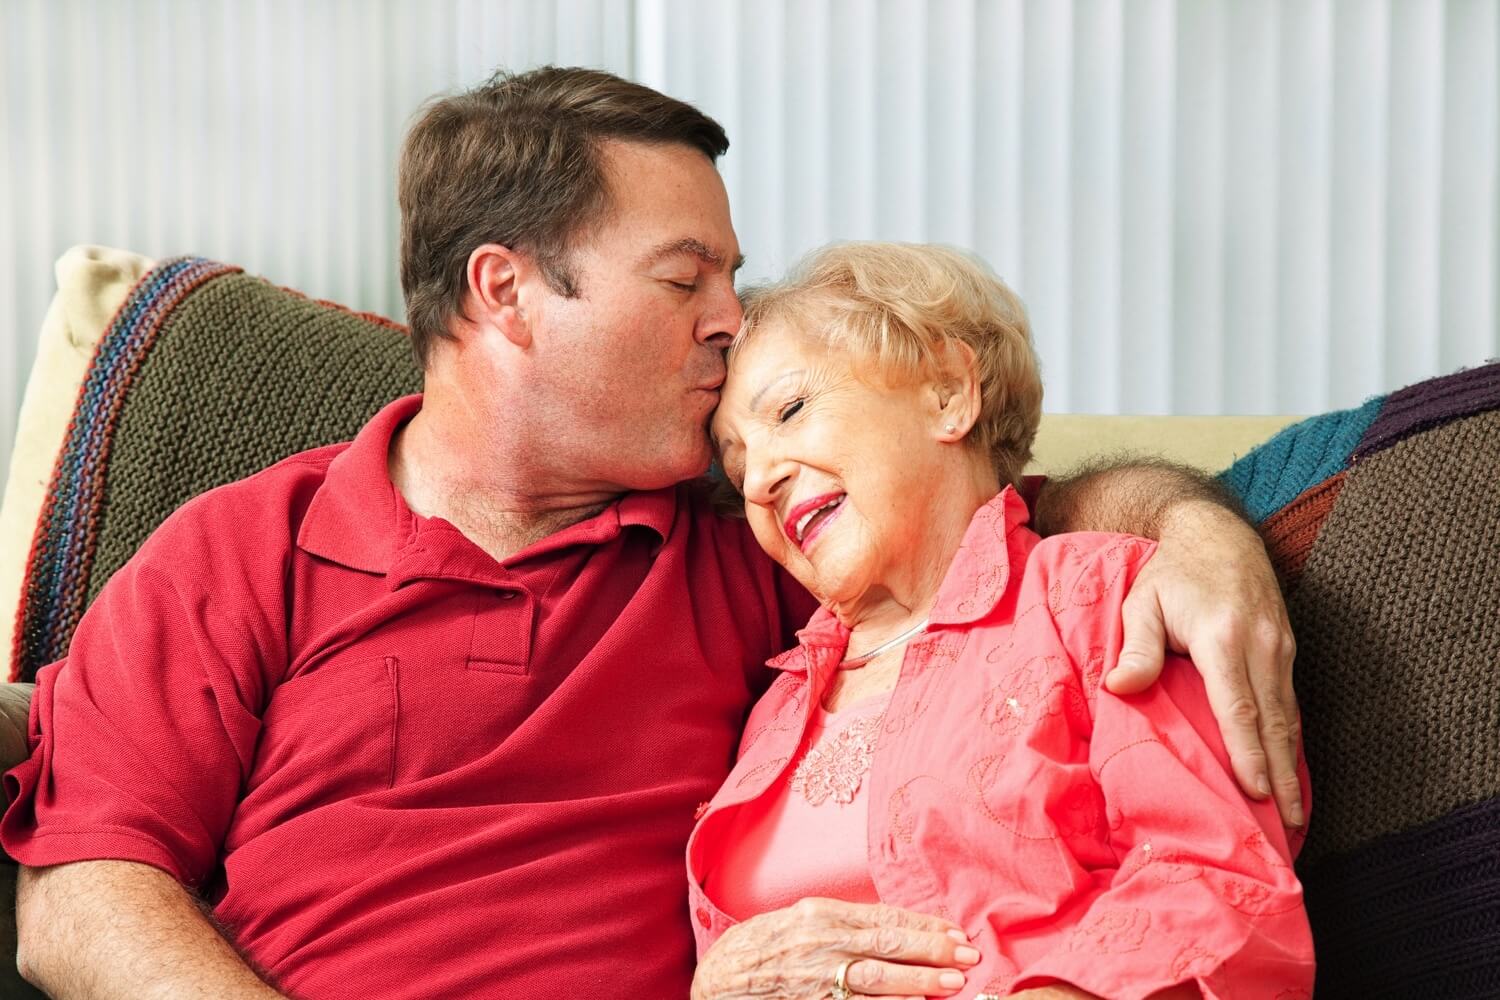 A man kissing his elderly mother's forehead as they sit together on a couch